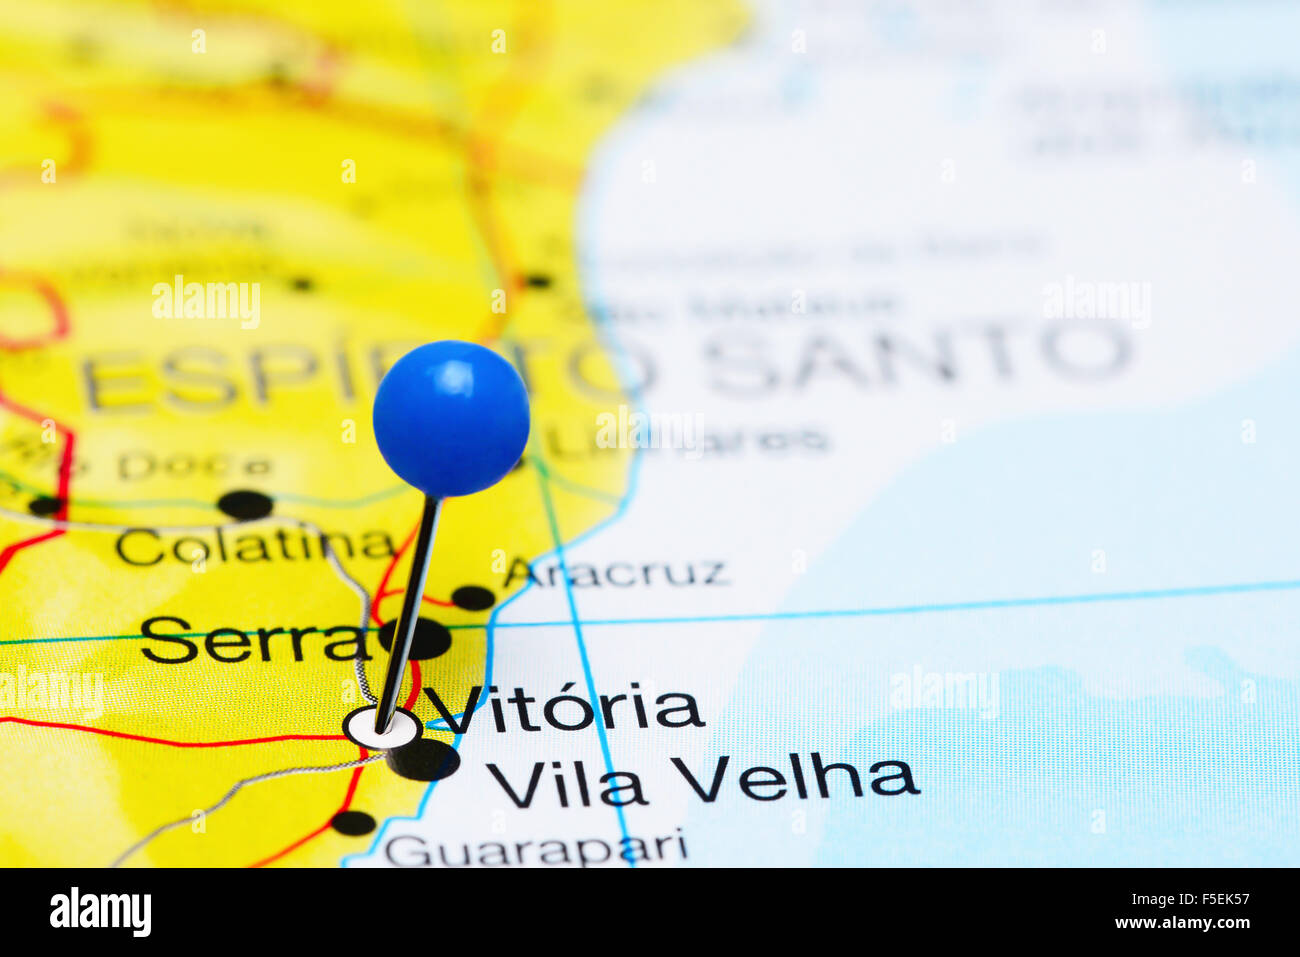 Vitoria pinned on a map of Brazil Stock Photo